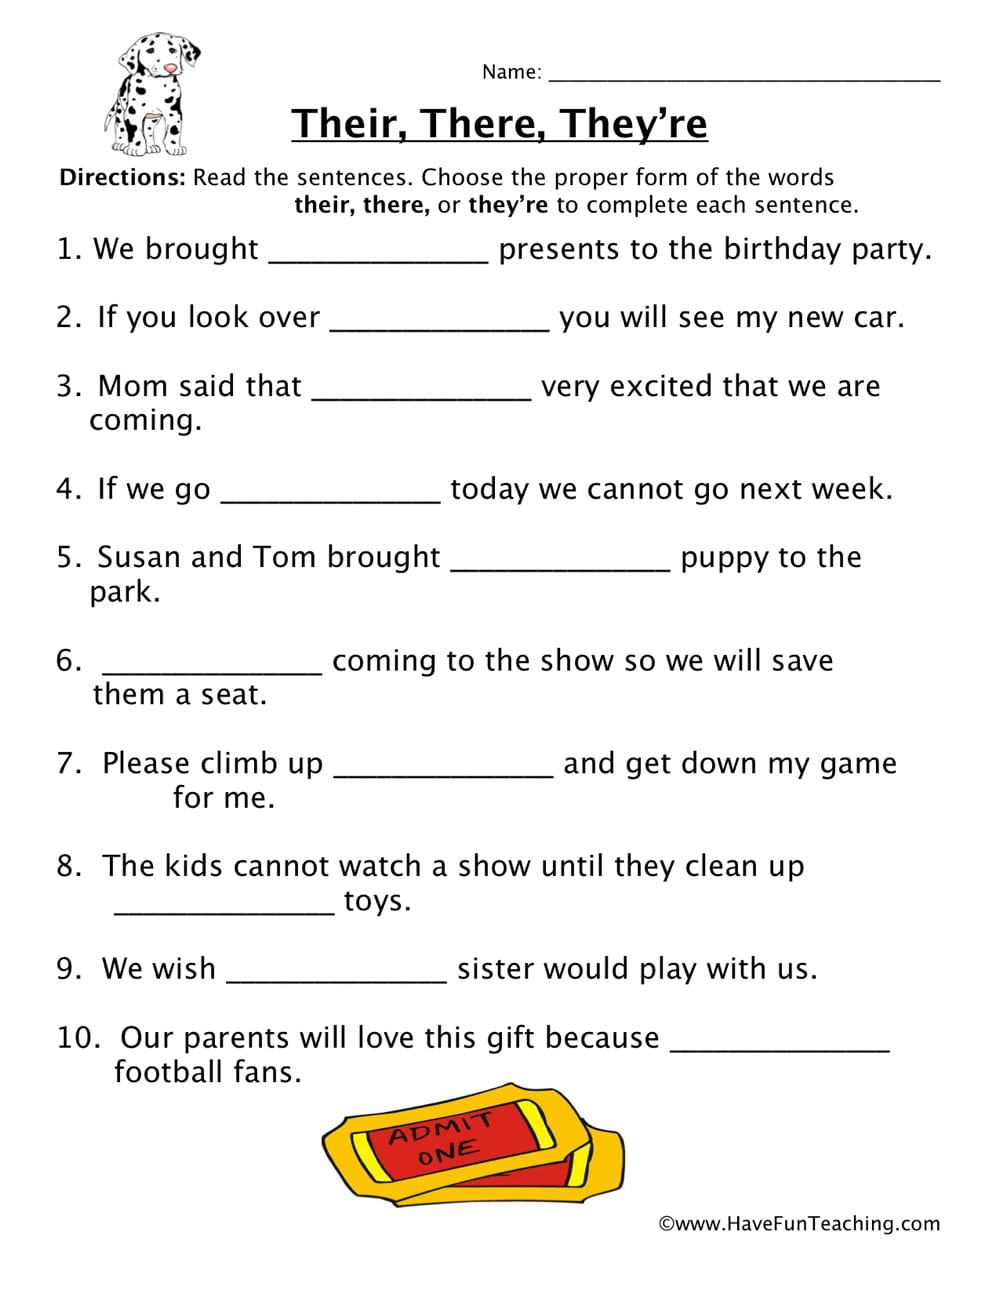 Their There They re Homophones Worksheet Have Fun Db excel